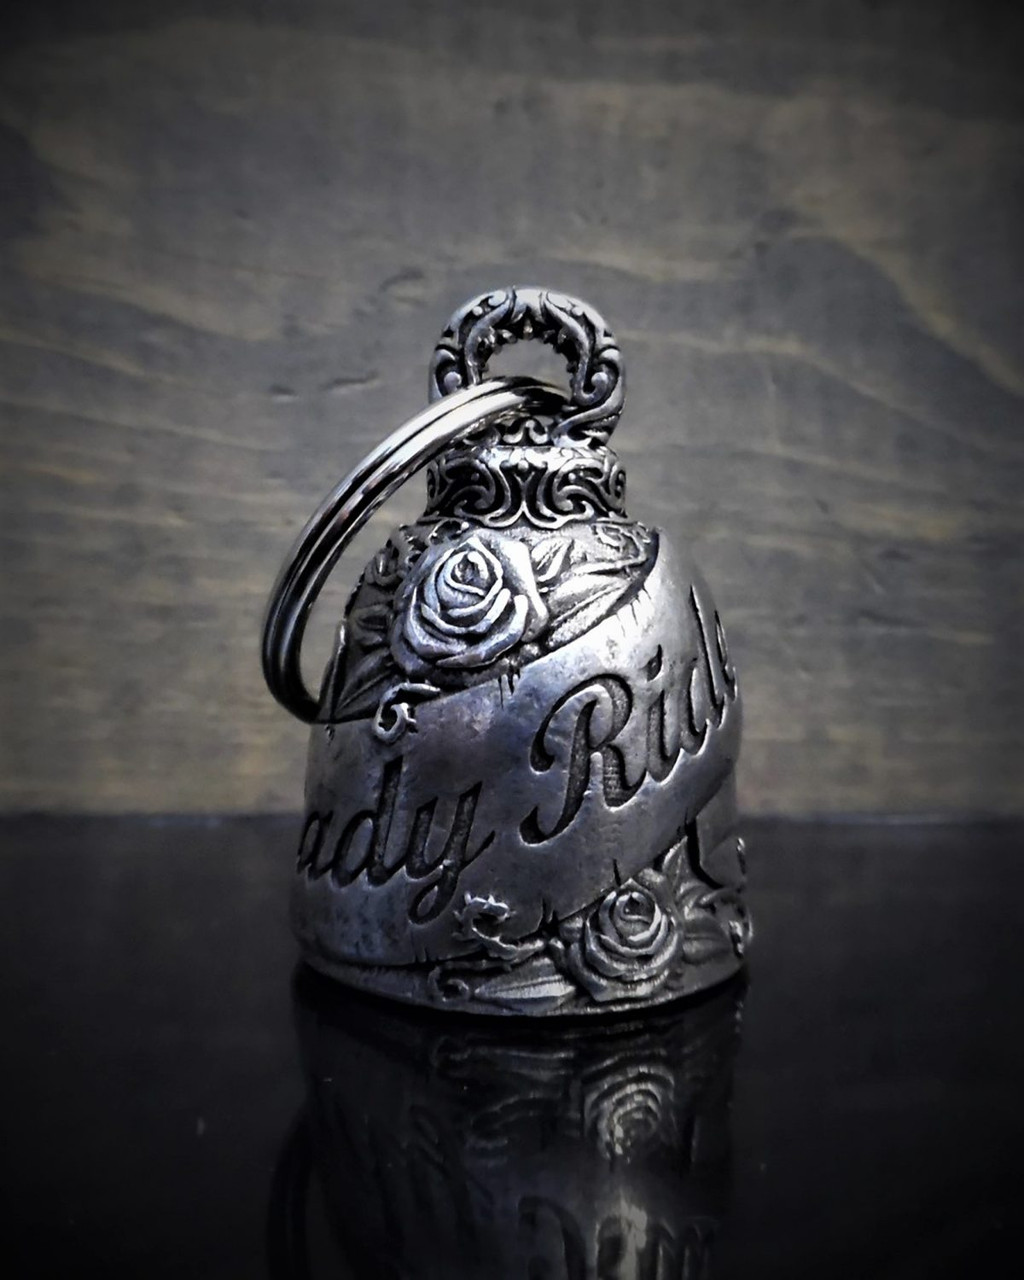 Guardian Bell, Lady Rider Sketched into this Biker Bell - Riders Biker  Supply